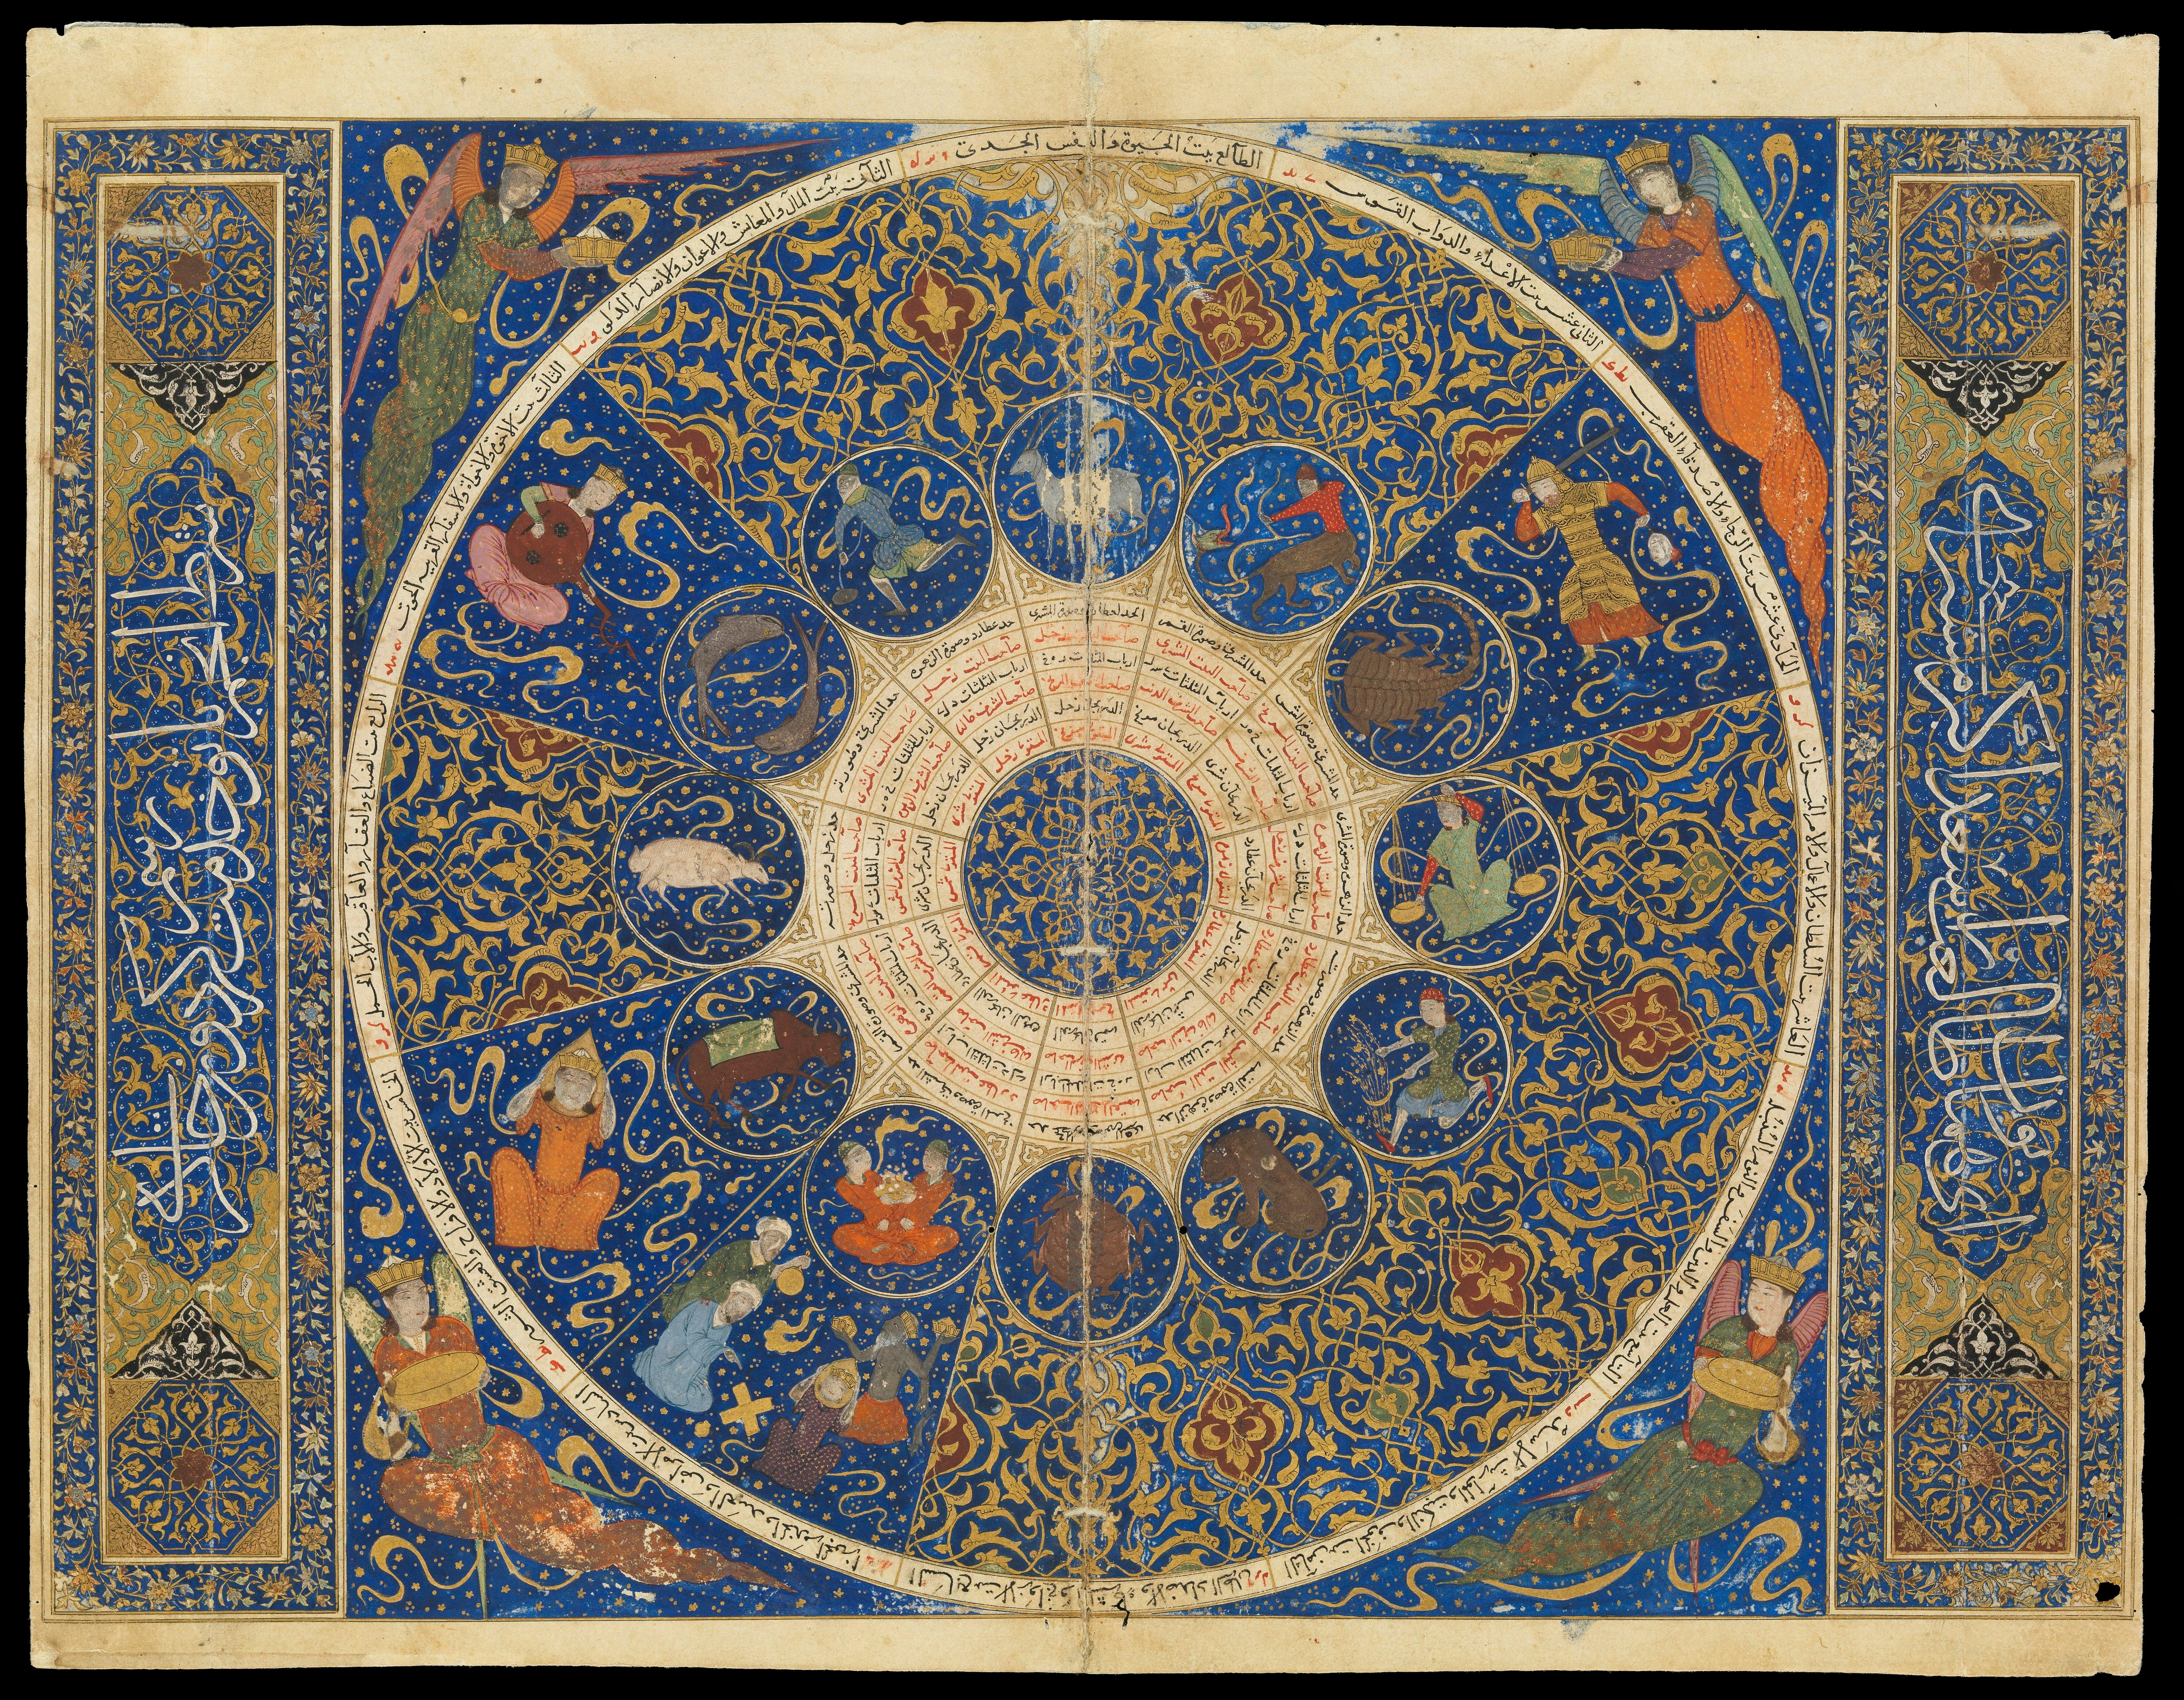 Mahmud ibn Yahya ibn al-Hasan al-Kashi, Horoscope from the Book of the Birth of Iskandar, Persia, 1411. Digital Image courtesy of The Wellcome Collection's Open Access Program. © Museum Associates/LACMA.